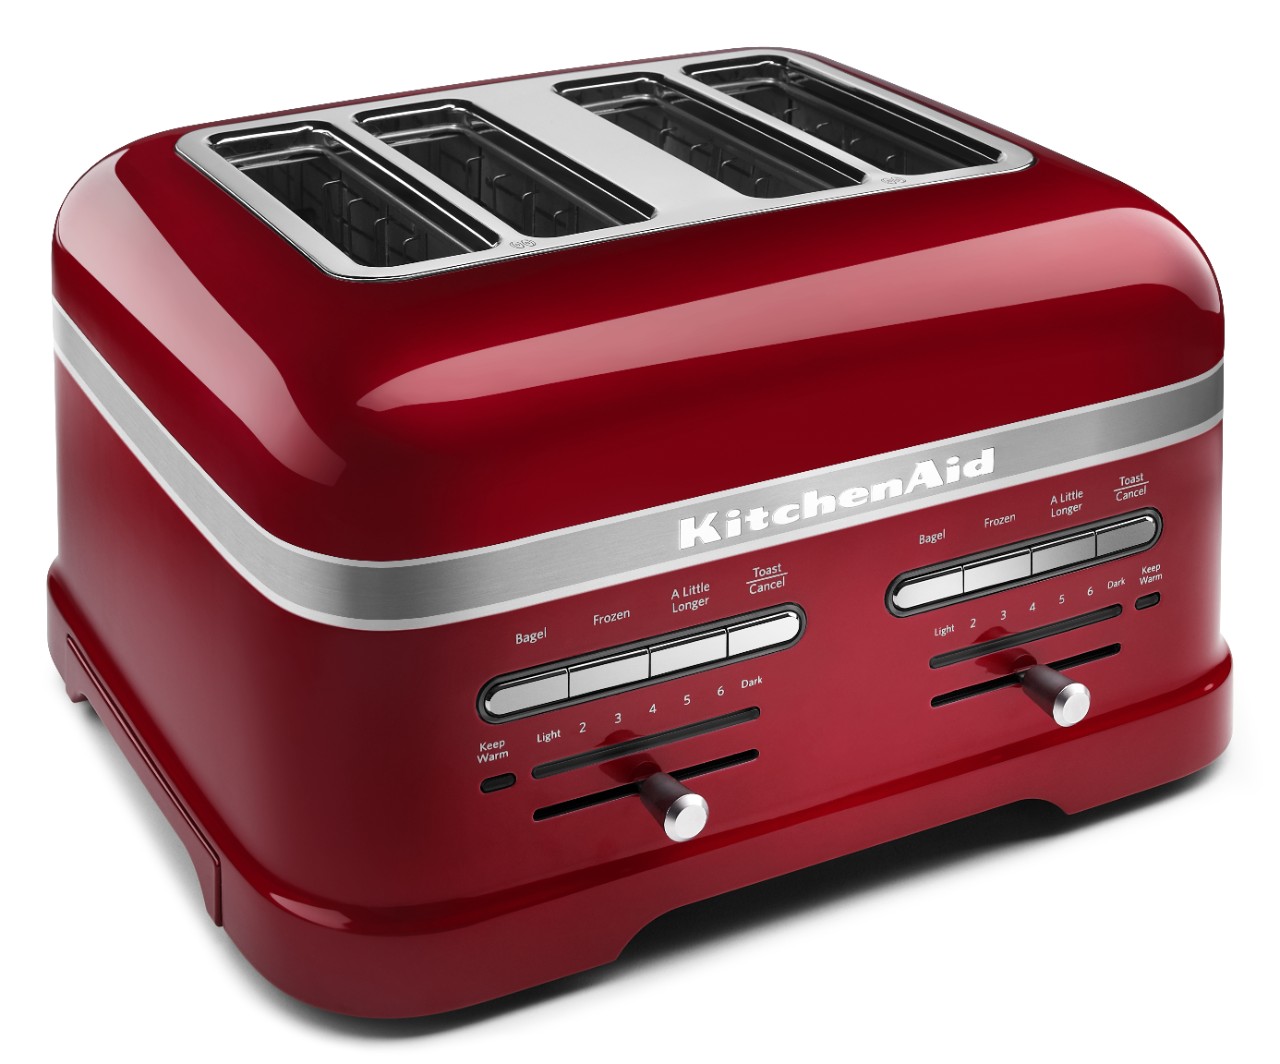 Enjoy toasted breads and pastries with KitchenAid® 4-slice toasters.